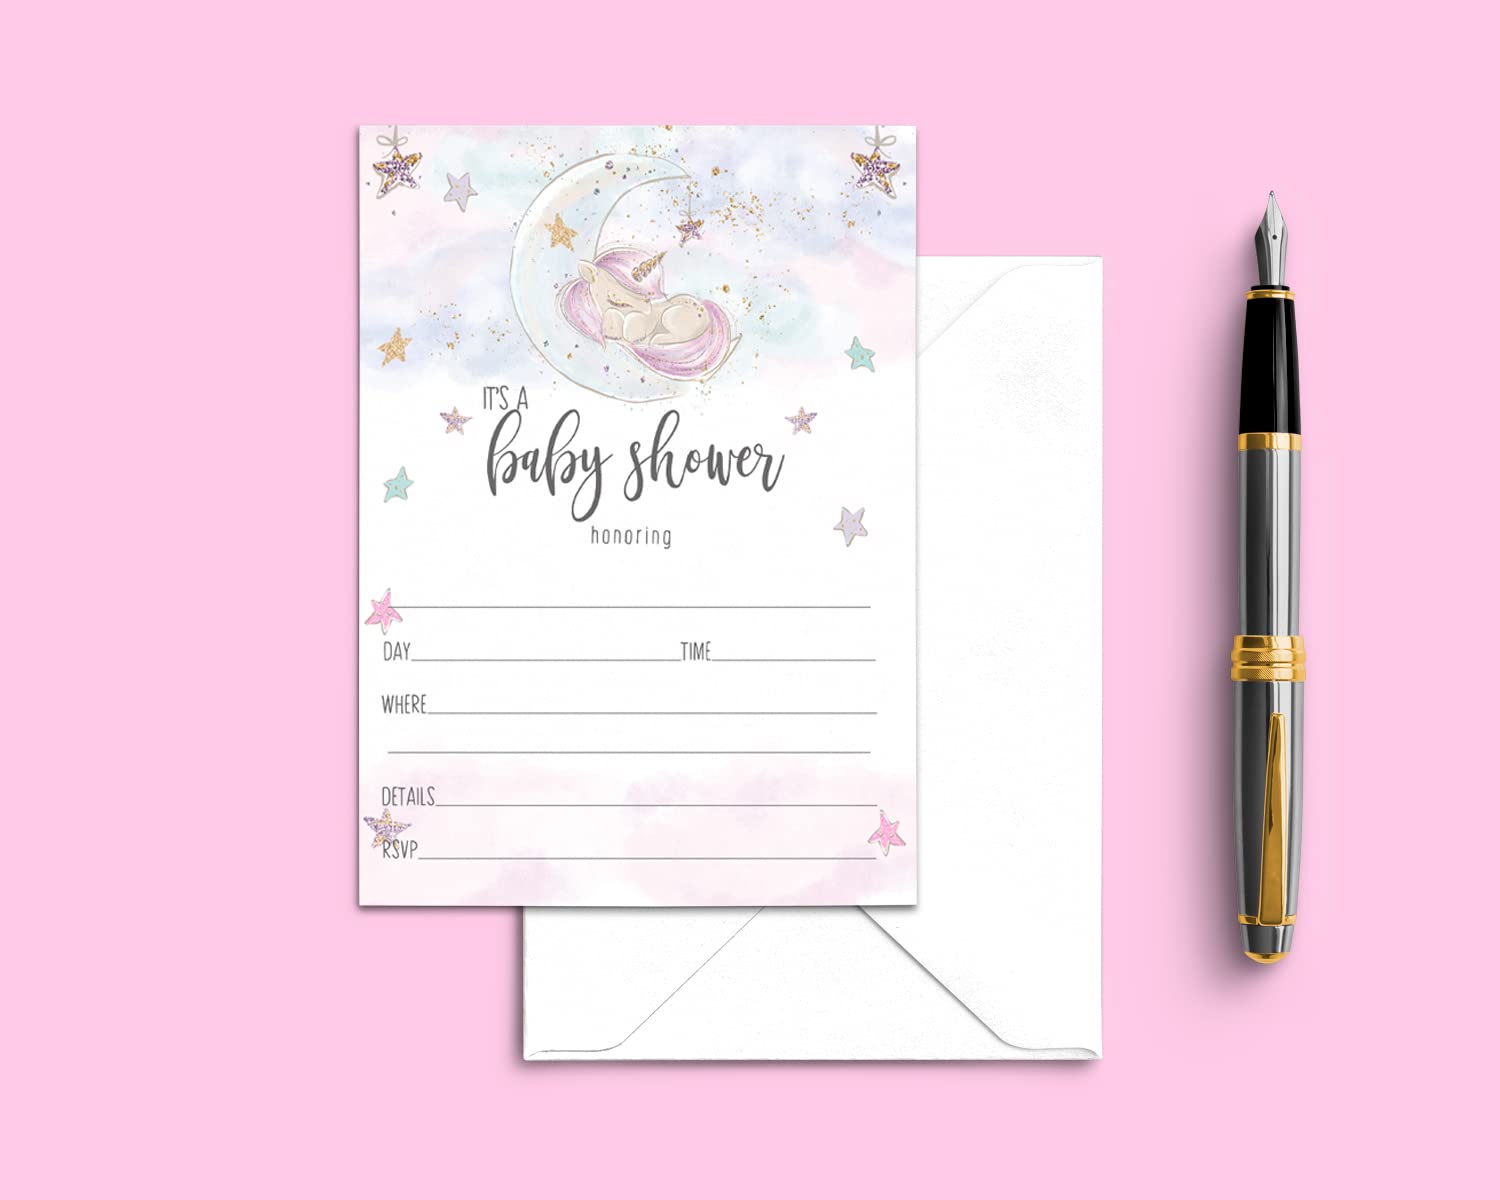 Unicorn Baby Shower Invitations Girls (25 Pack) Fill-In Invites for Pink Baby Shower, Gender Reveal, Sprinkle - Star and Moon Theme Rainbow - Blank Invitation with Envelopes 5x7 Printed Cards